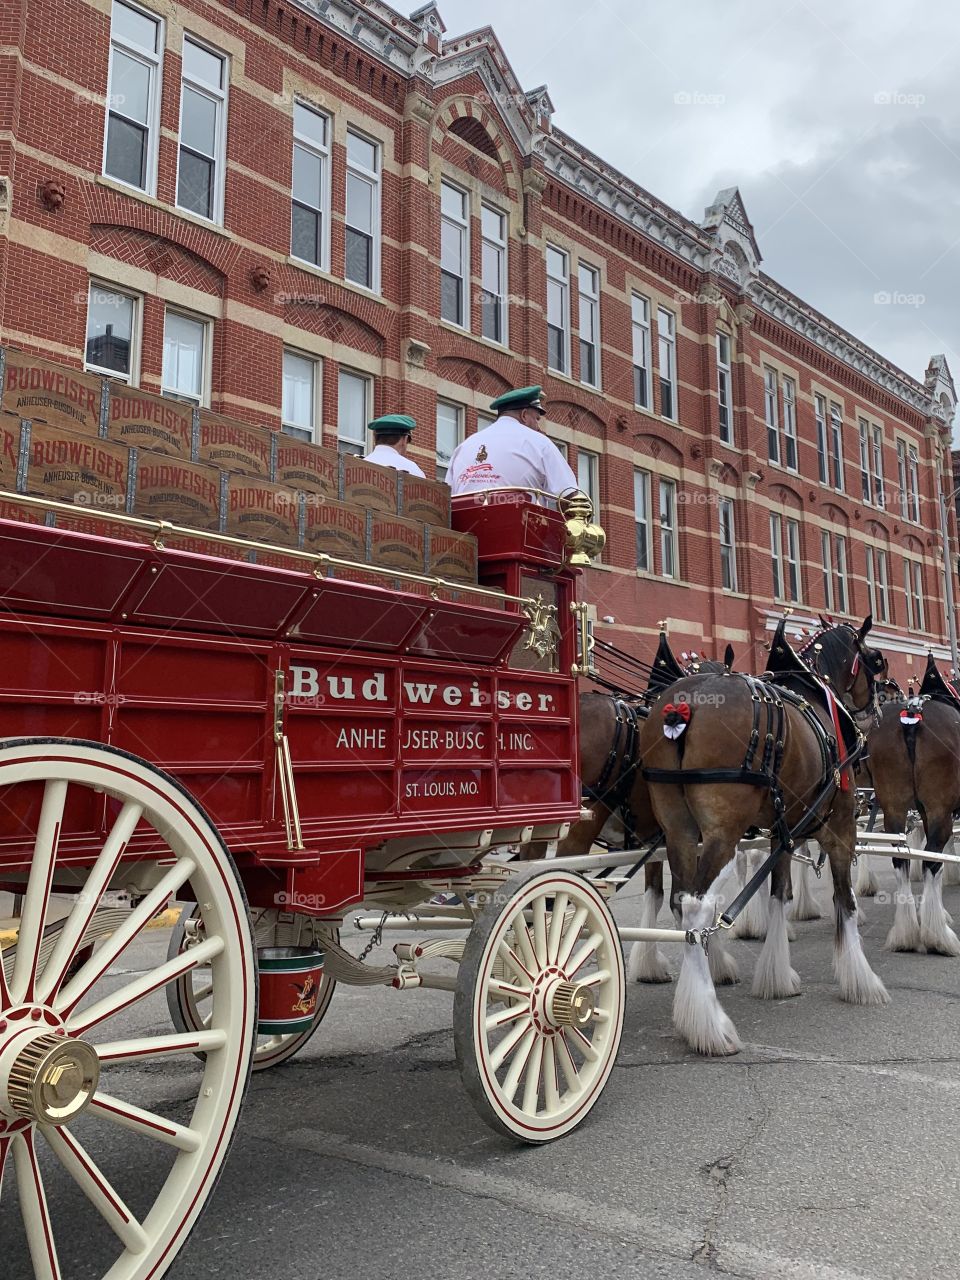 2019 Winona Budweiser Clydesdales Wagon